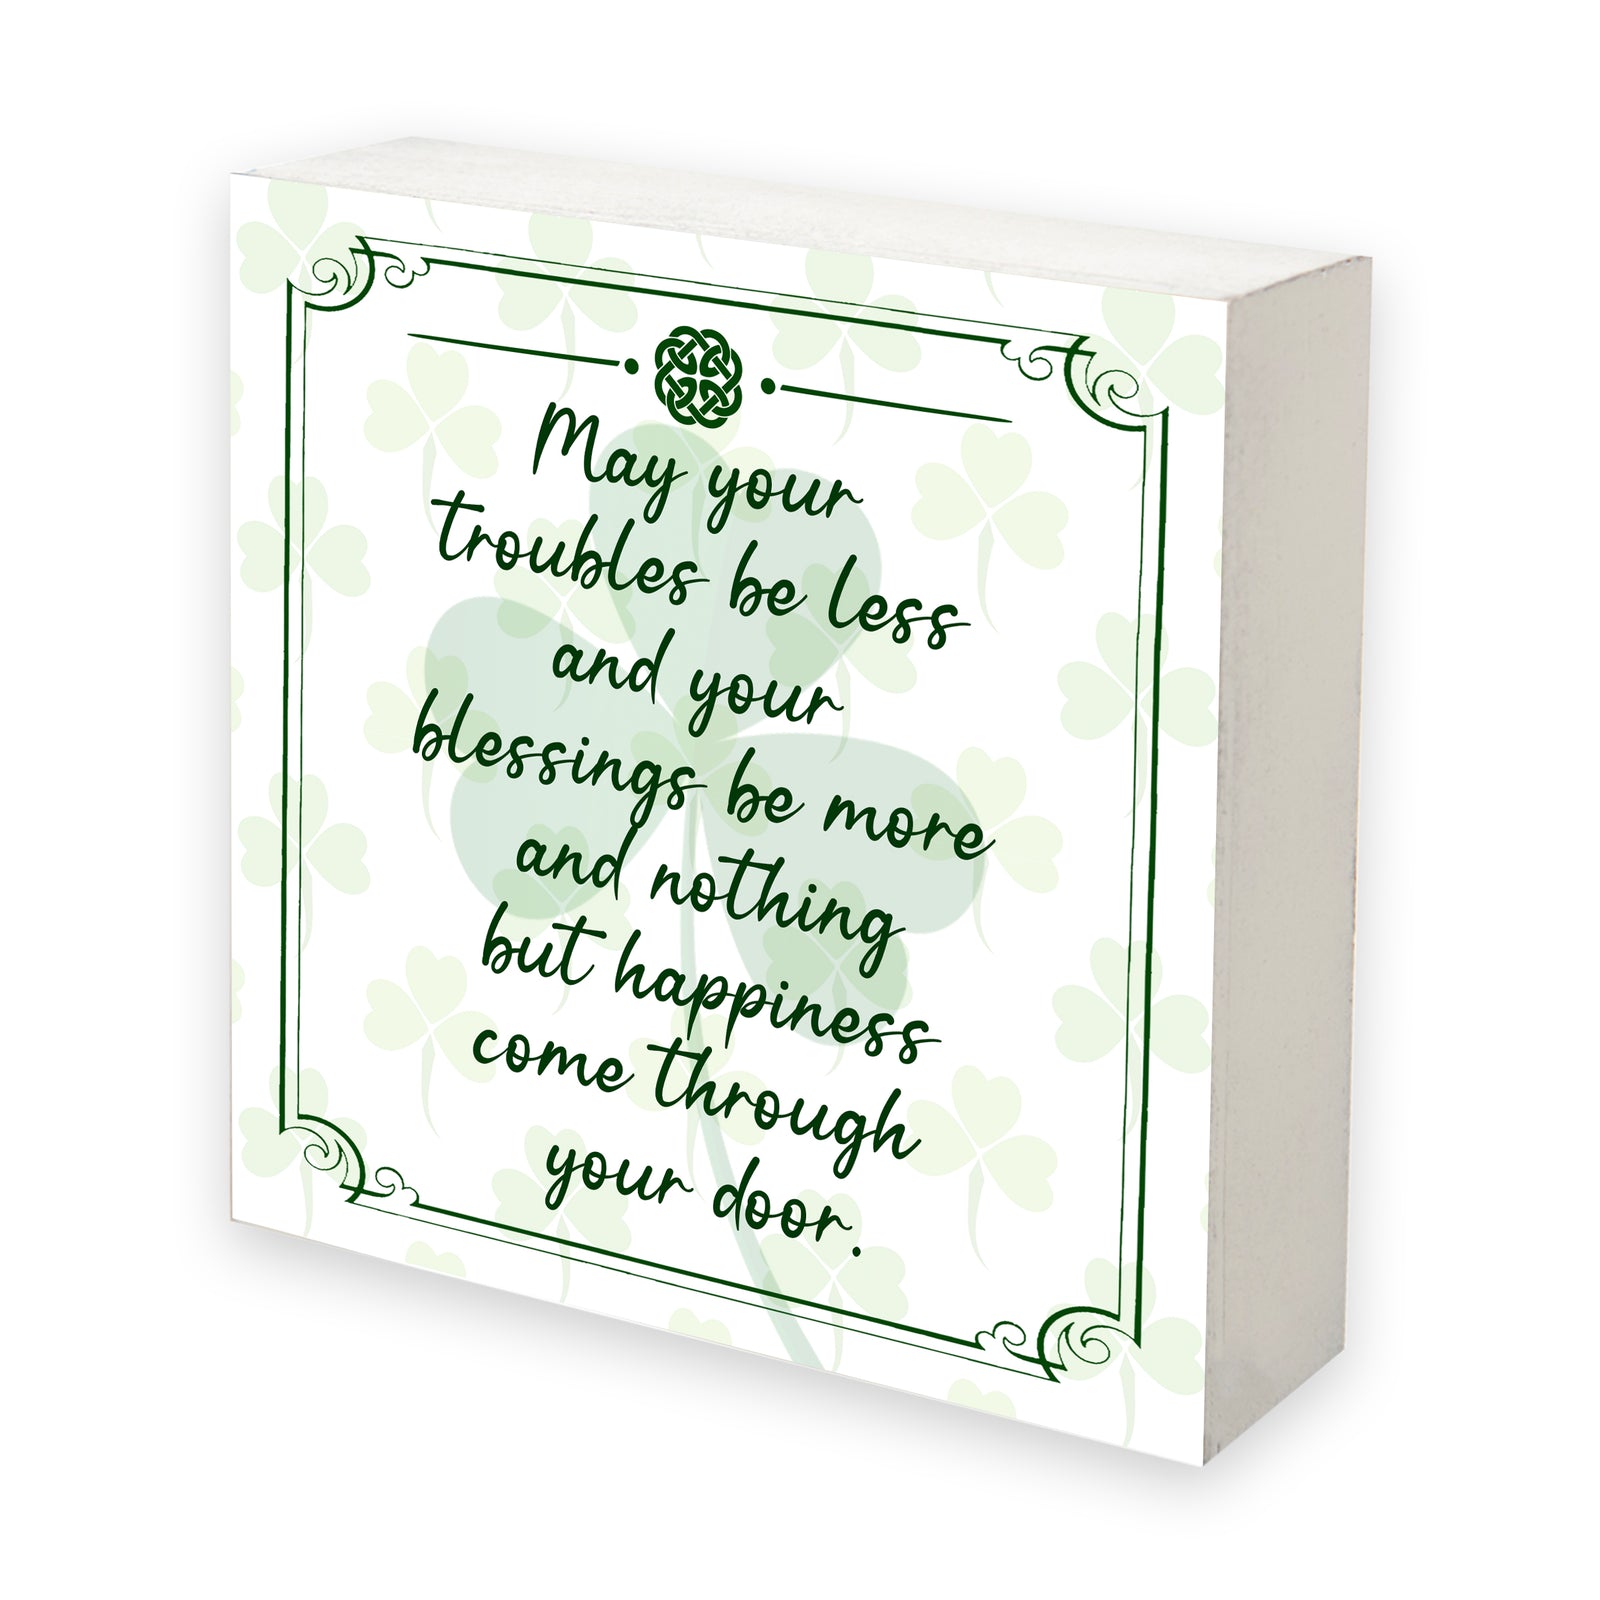 St. Patrick’s Day Irish Everyday Shadow Box 10x10 - May Your Trouble Be Less